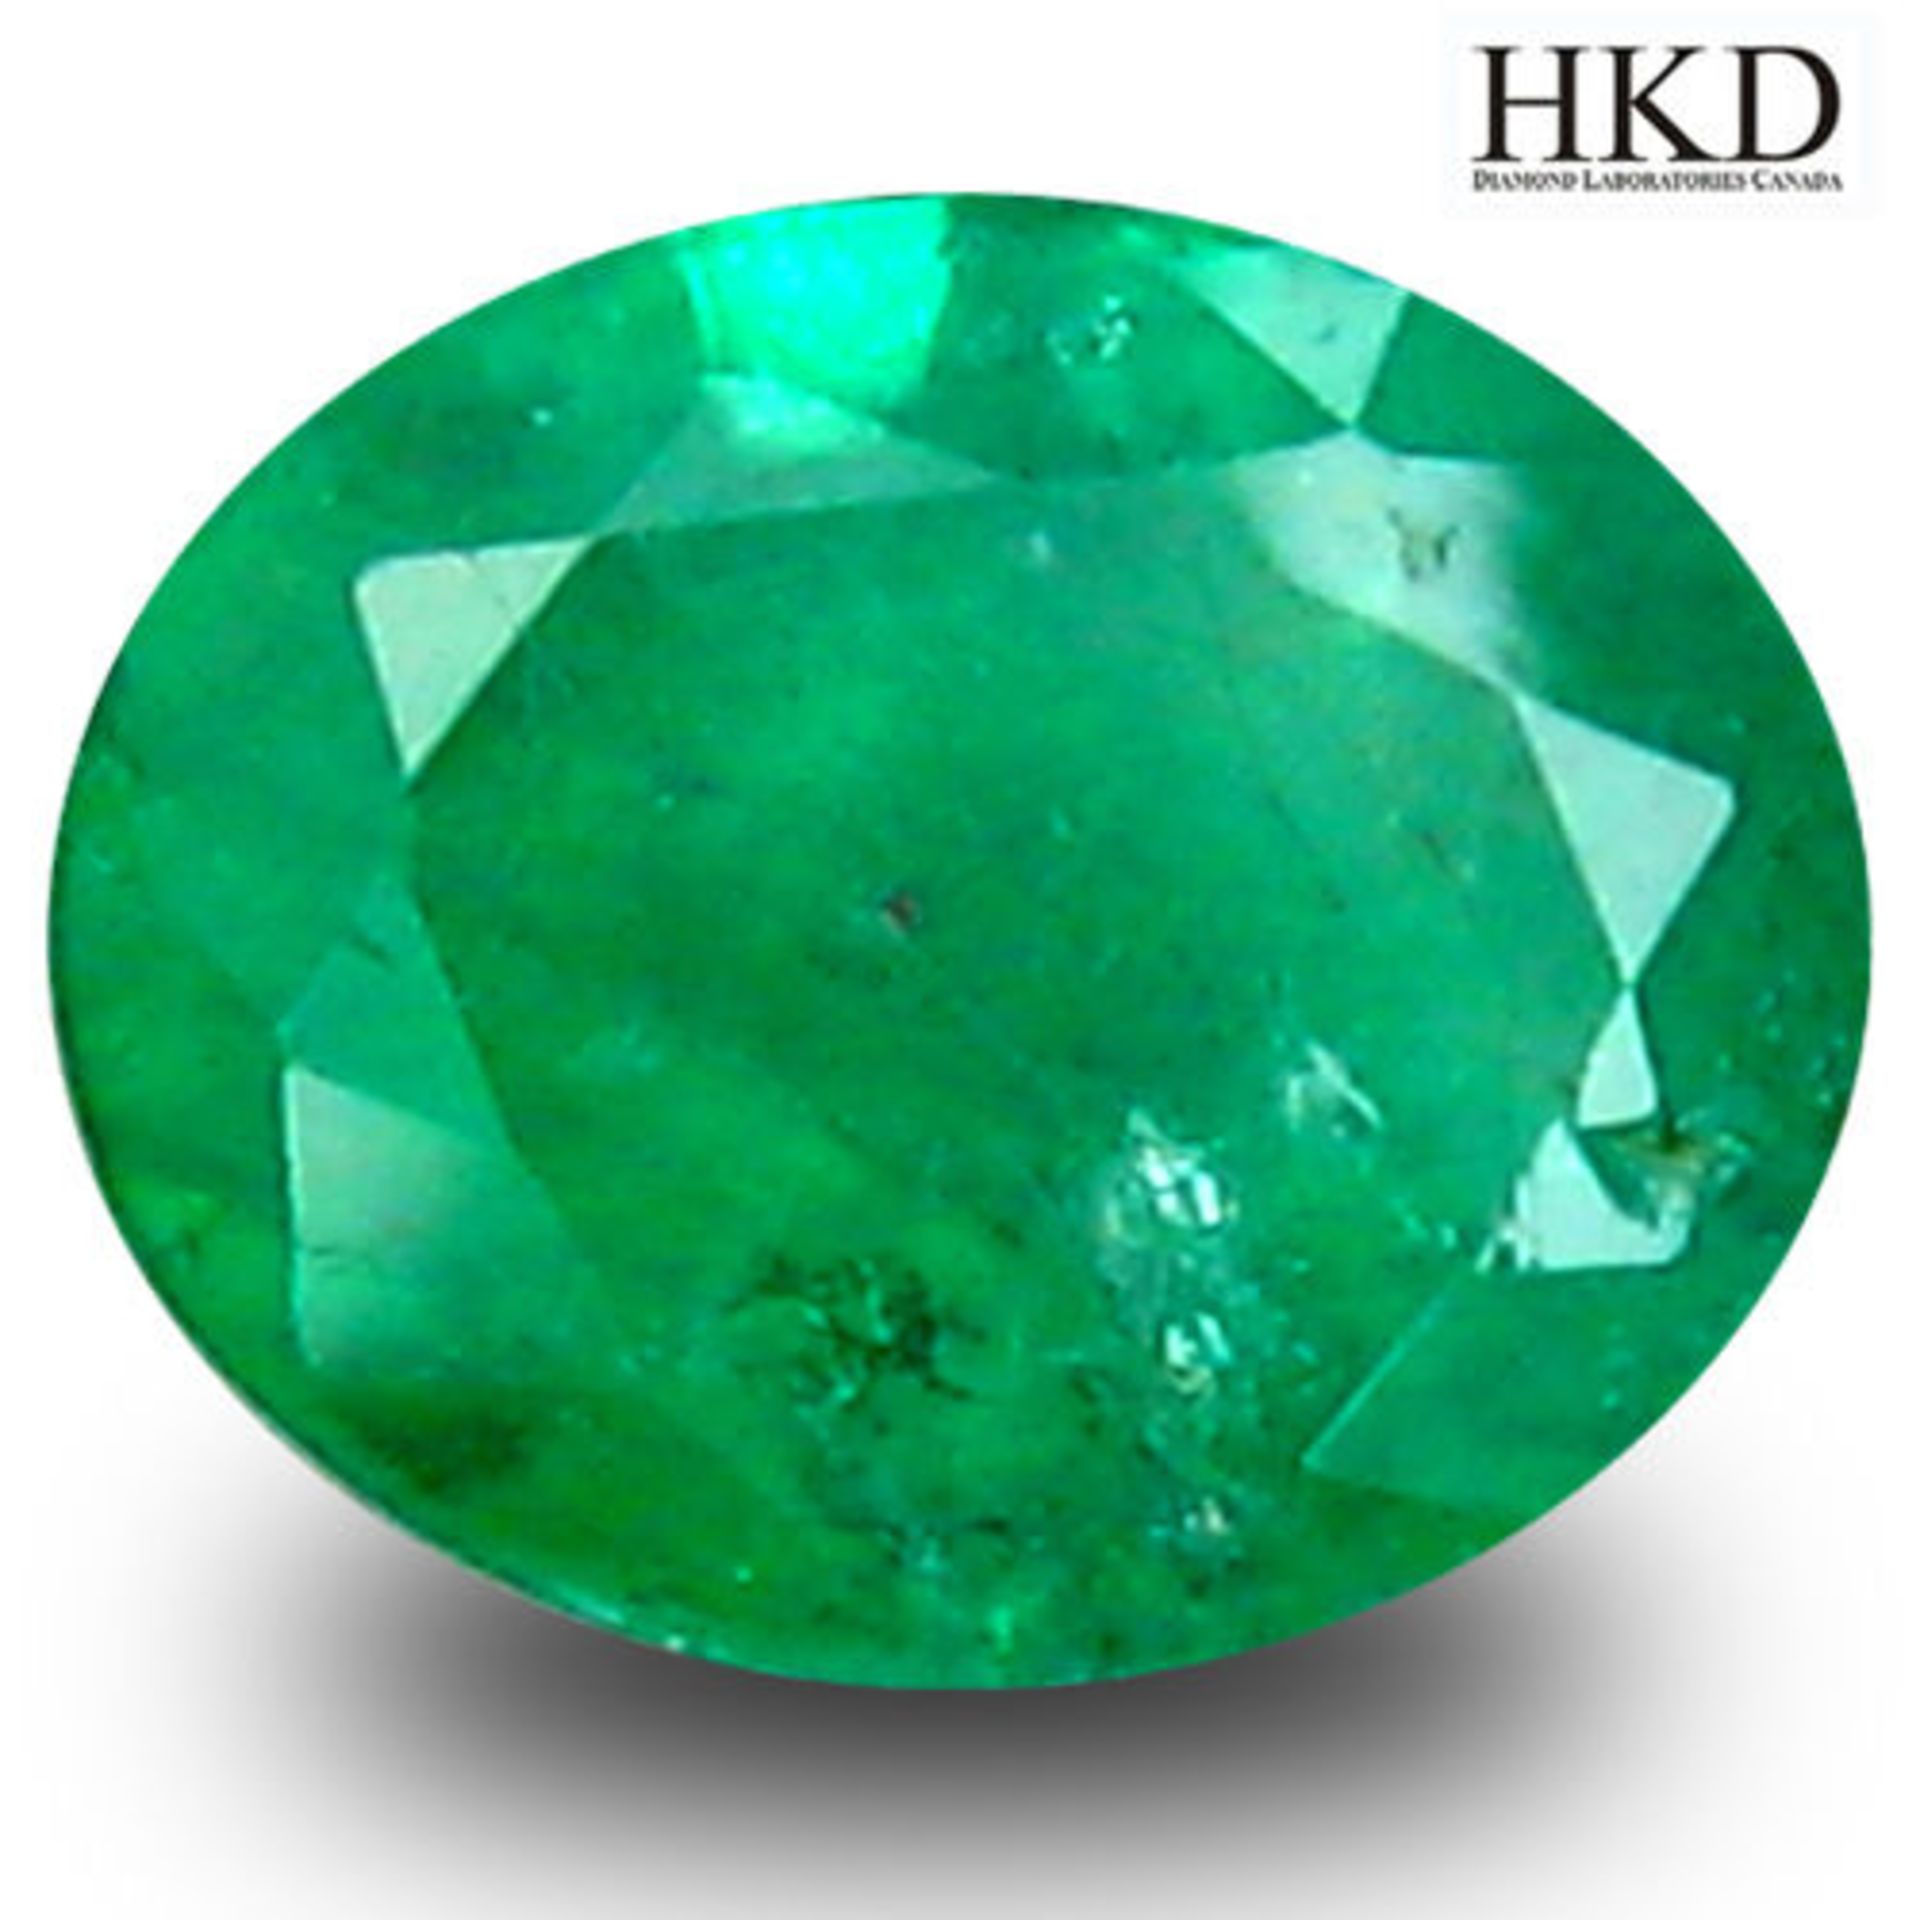 Emerald 0.66ct Gem With Certificate - Gem Valued At $1724.66 (Approx £1123.45)